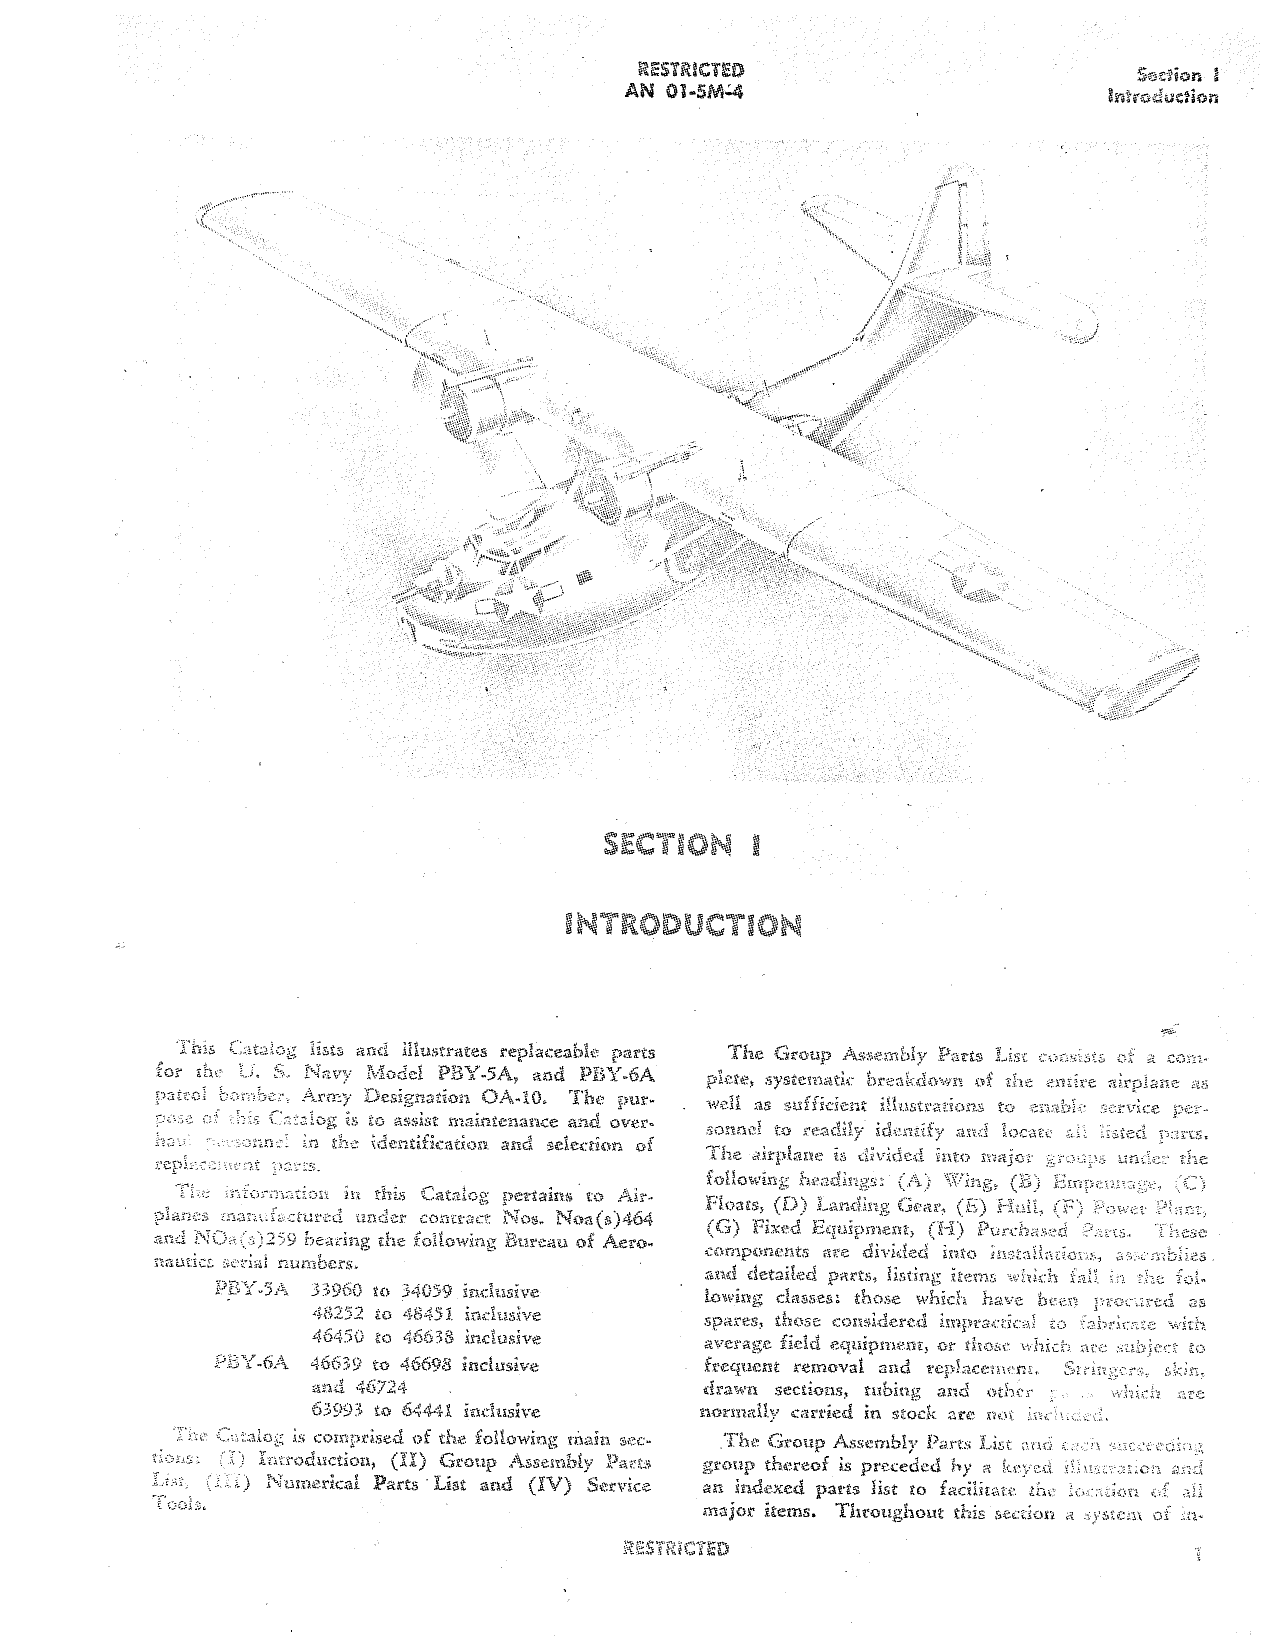 Sample page 5 from AirCorps Library document: Parts Catalog for OA-10, PBY-5A, and PBY-6A